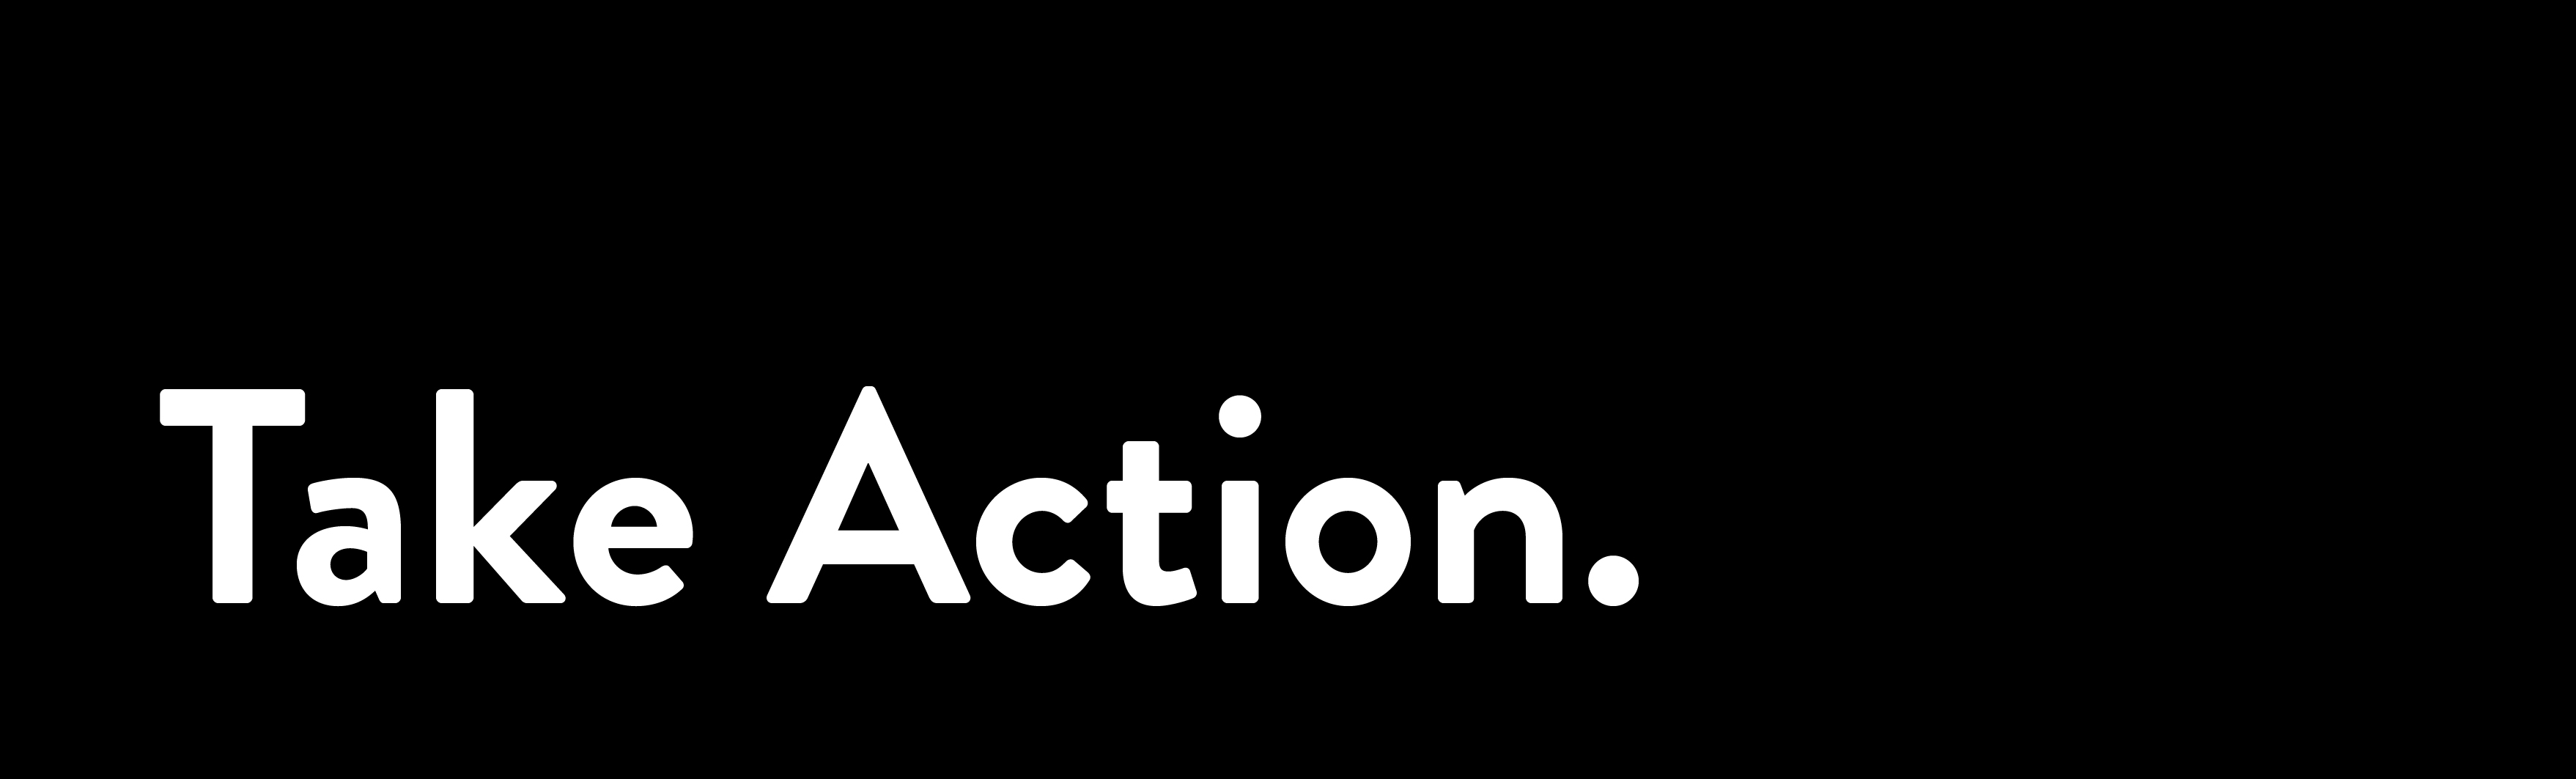 Petitions and Actions You Can Take banner